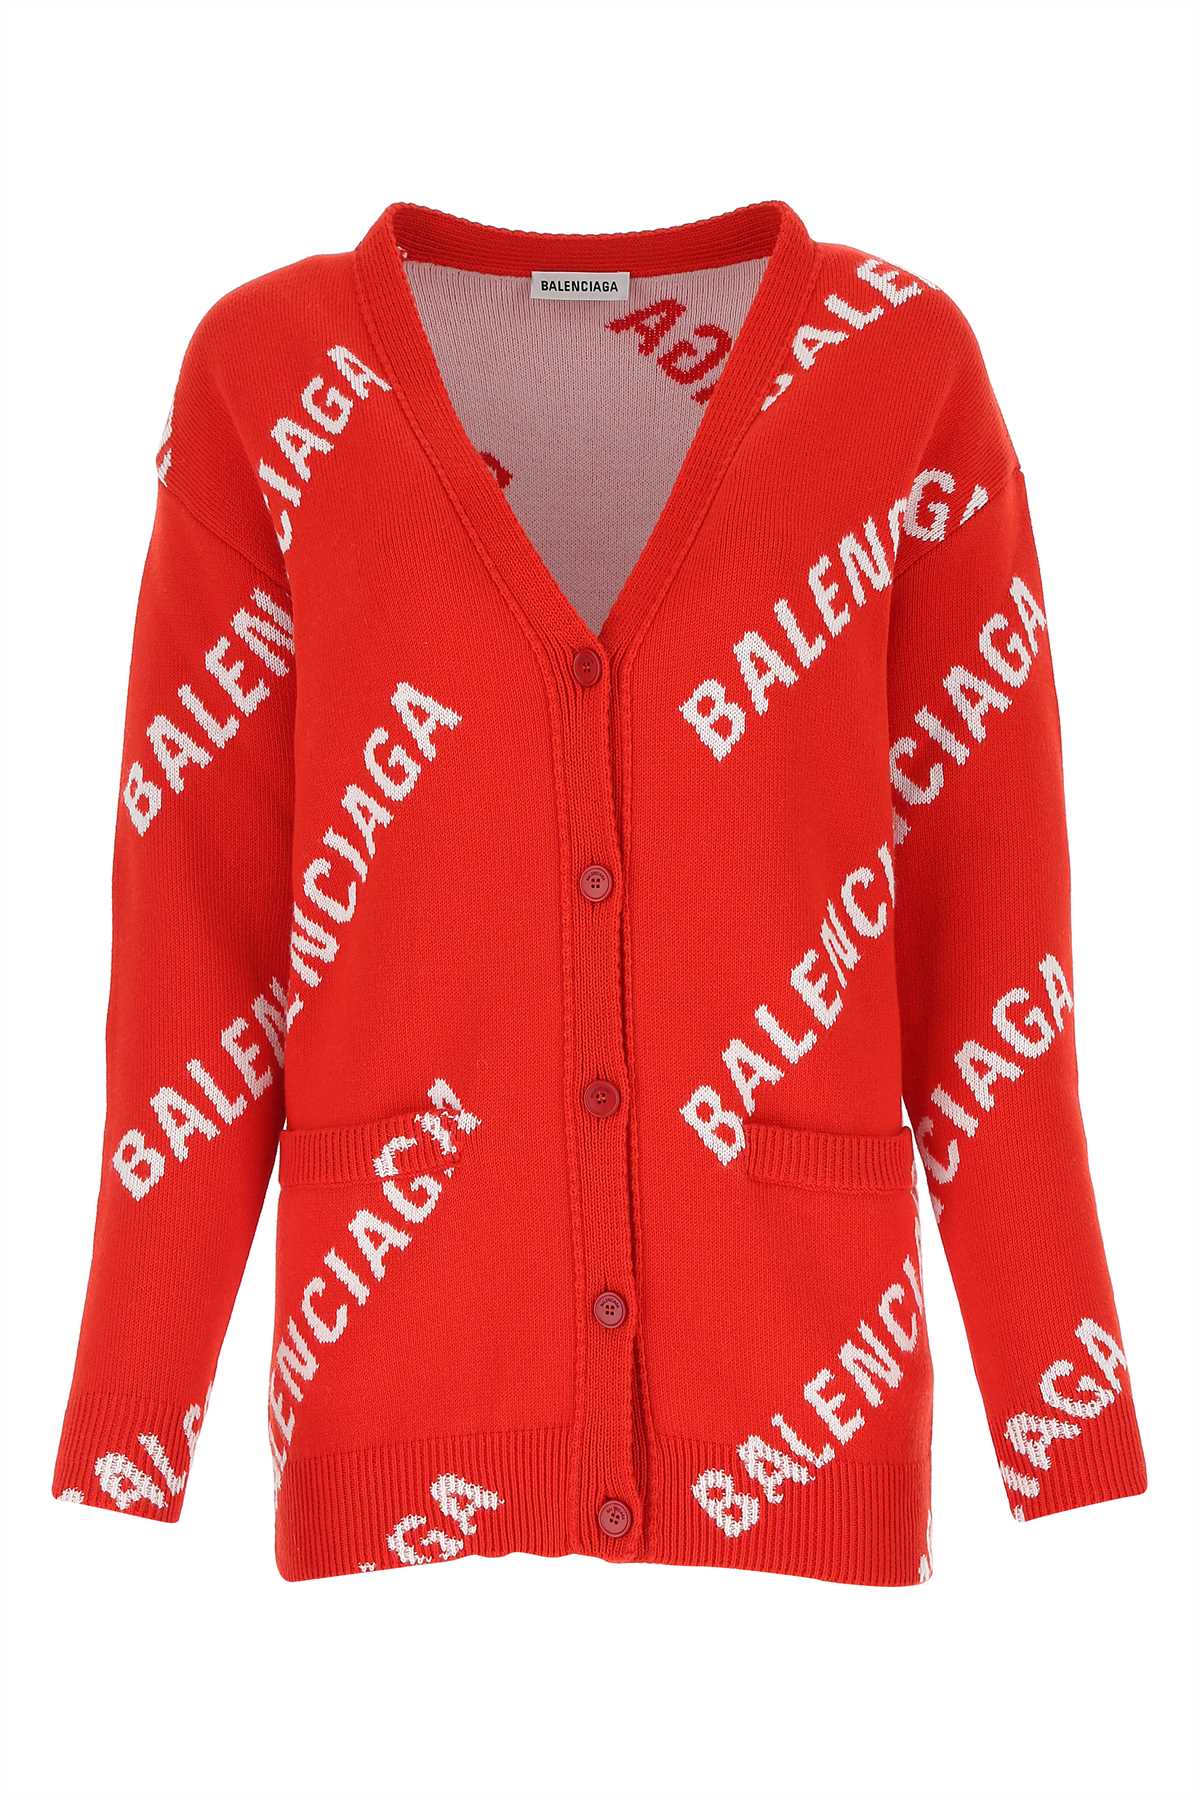 Balenciaga Embroidered Stretch Cotton Blend Oversize Cardigan In Red